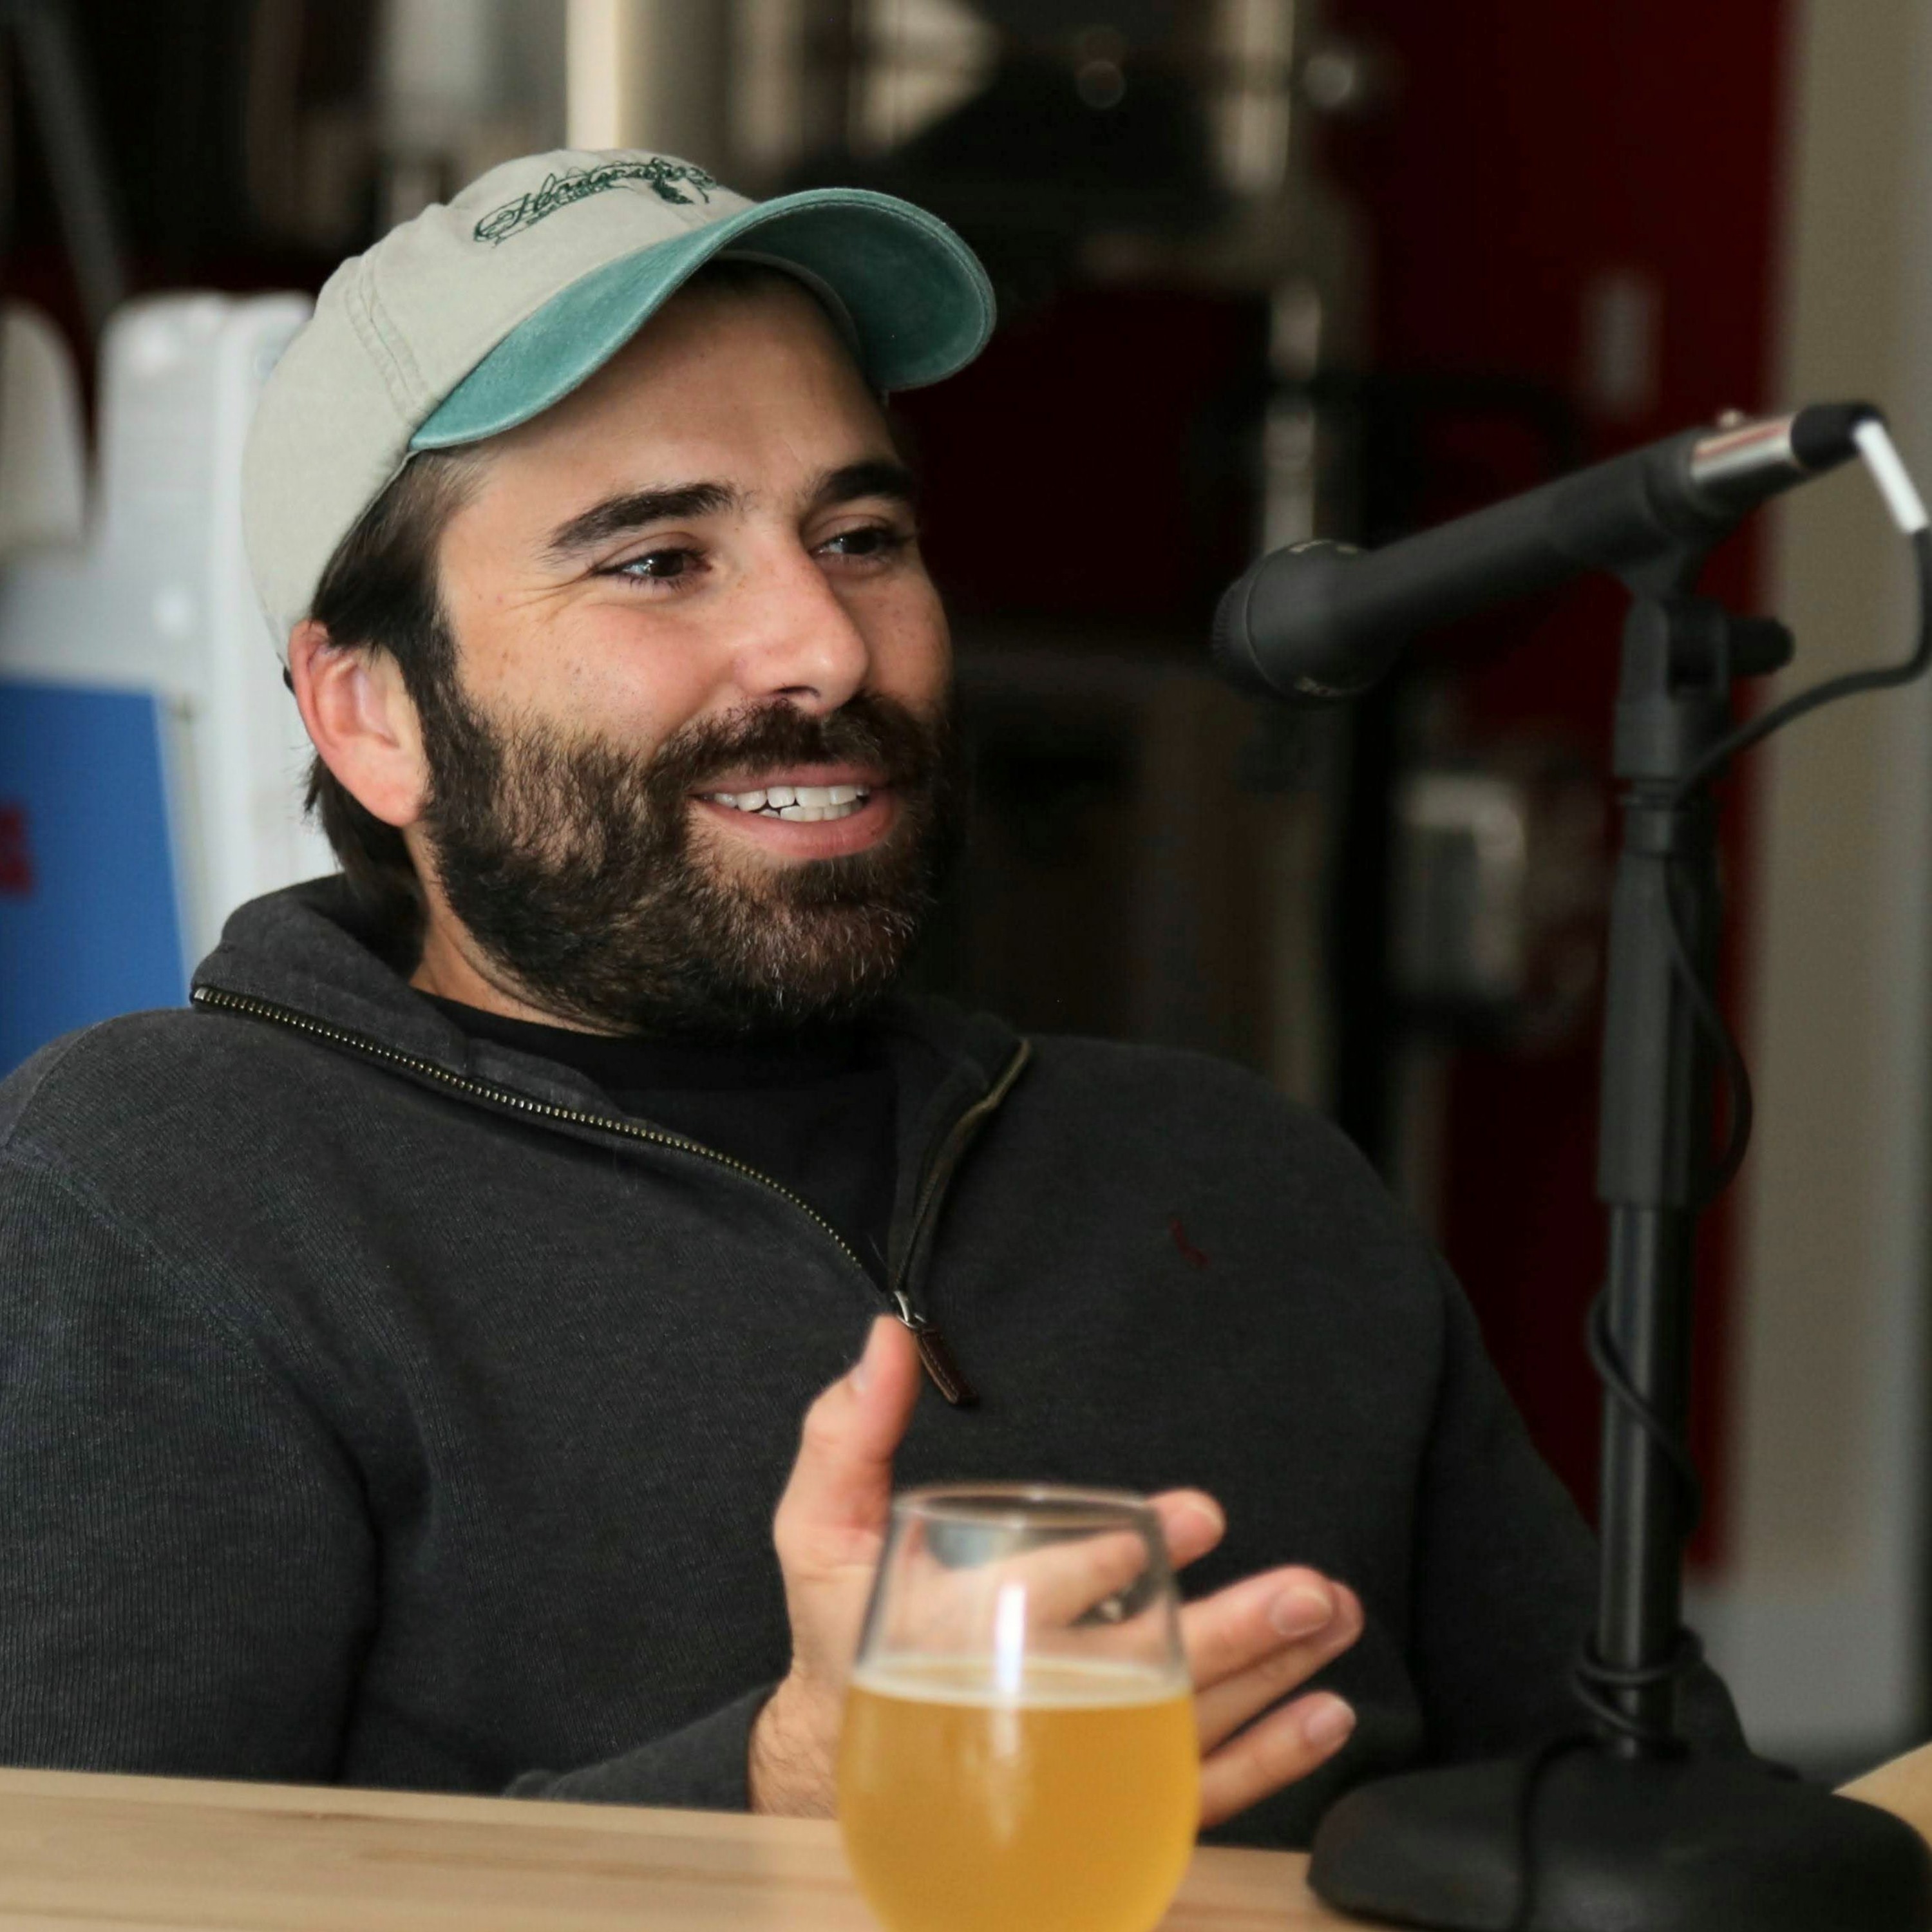 Marco Leyte-Vidal of Miami's Unseen Creatures Brewing on beer and creativity